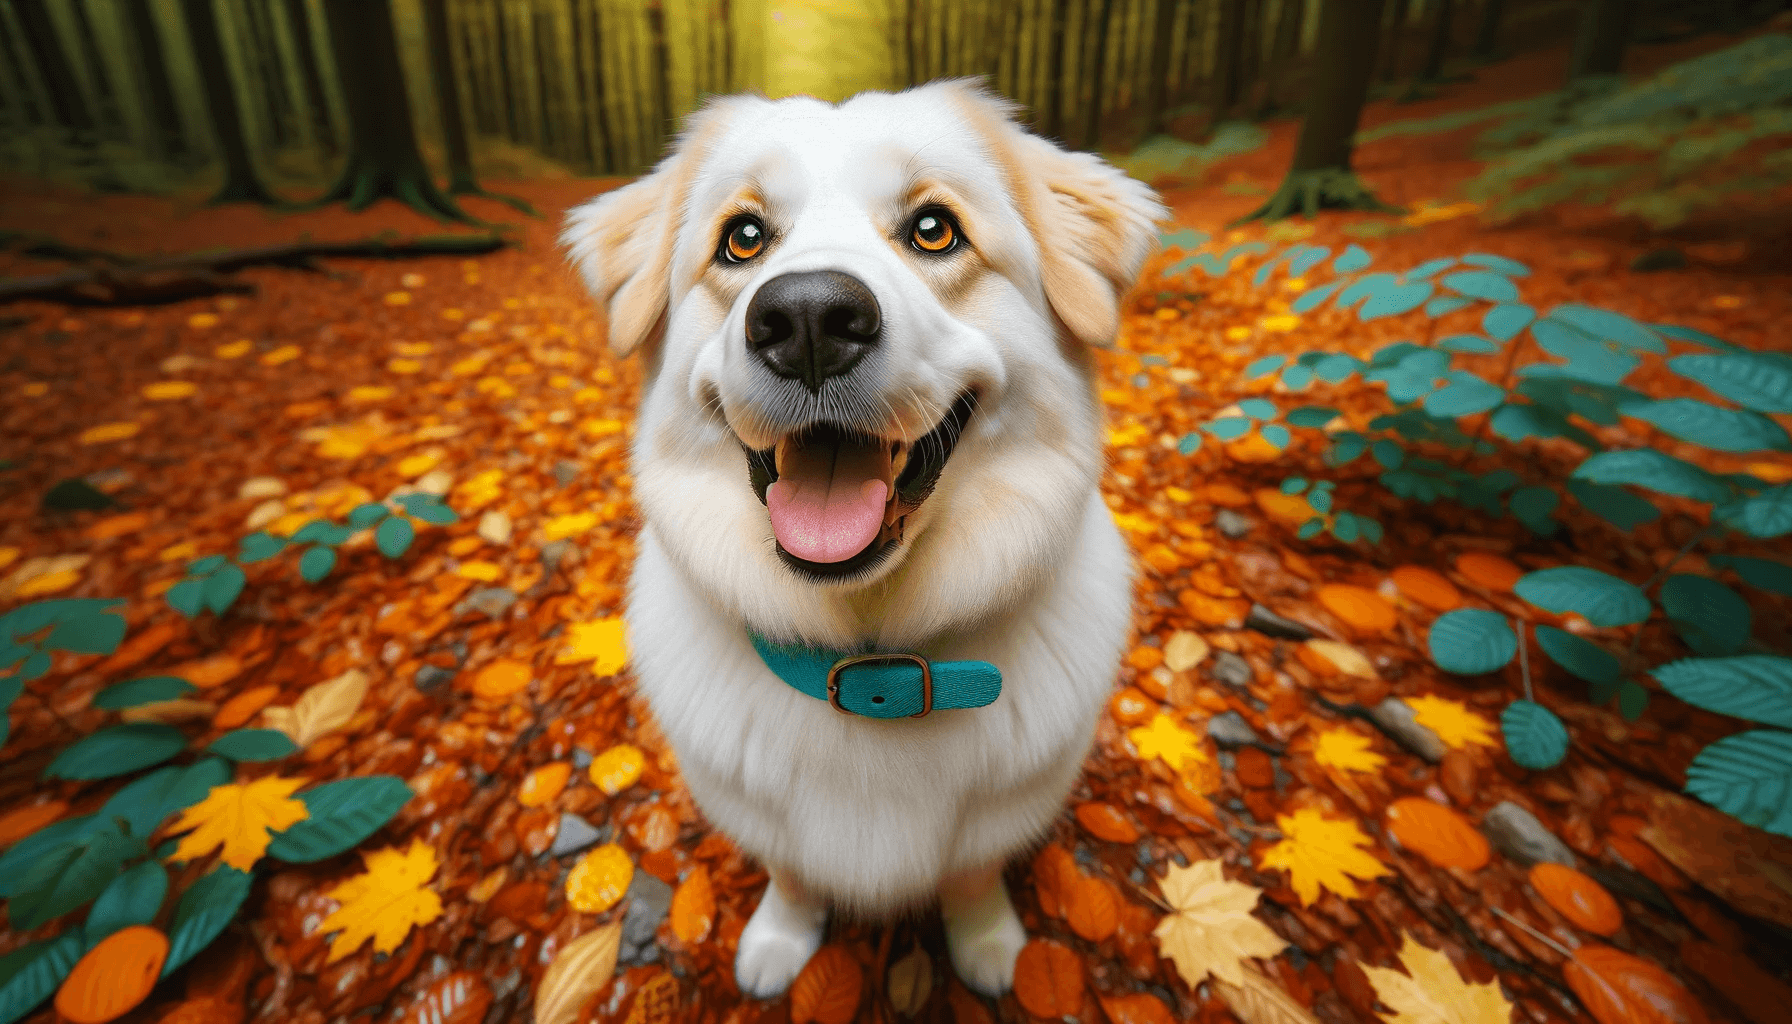 A cheerful Pyrenees Lab Mix dog with a bright white coat sitting on a carpet of autumn leaves. The dog is looking up with a joyful expression, tongue